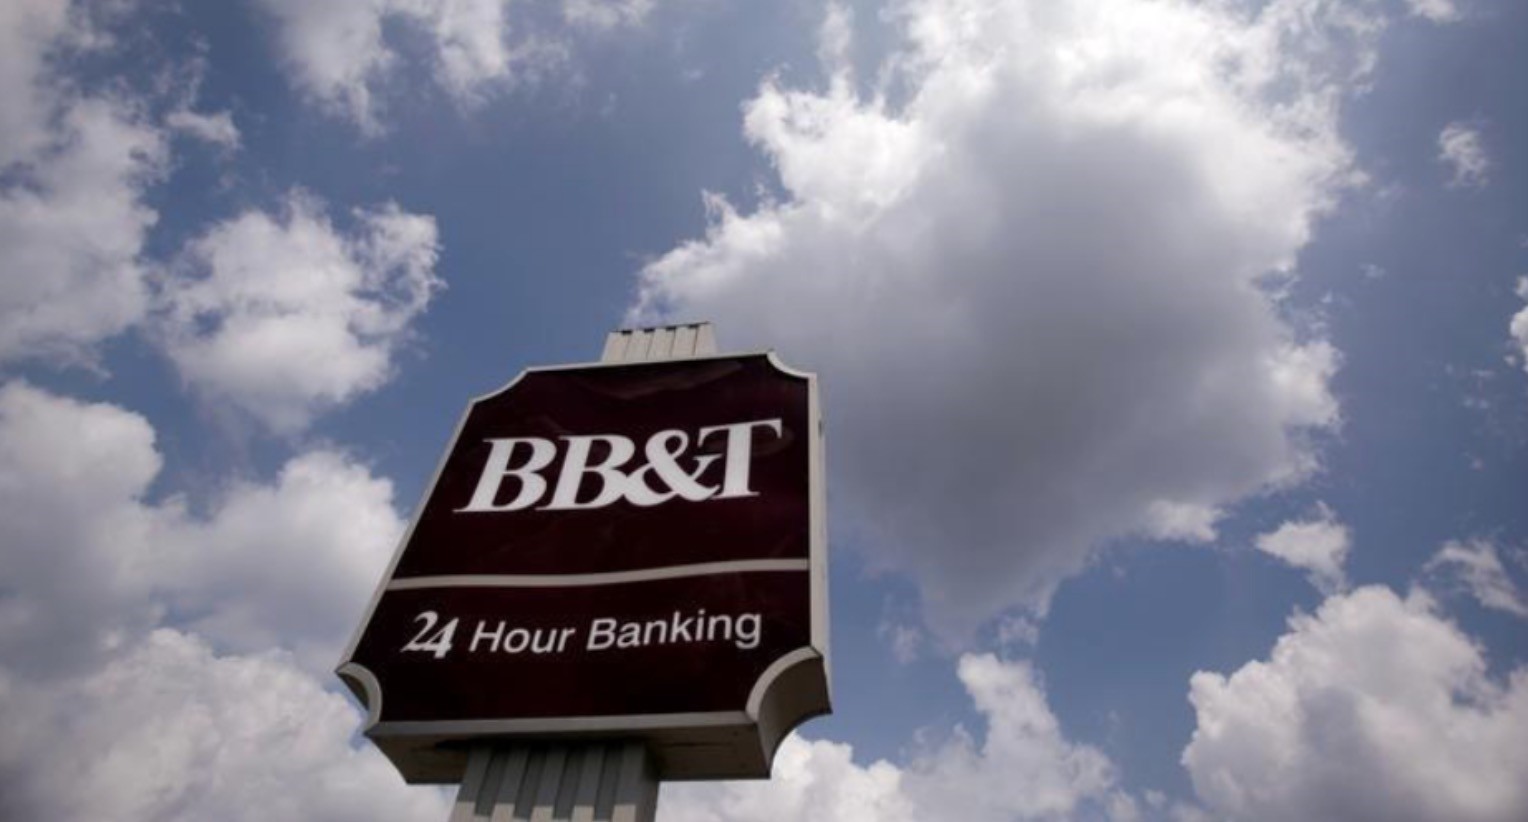 A BB&T bank branch sign is seen in Arlington, Virginia, August 14, 2009.